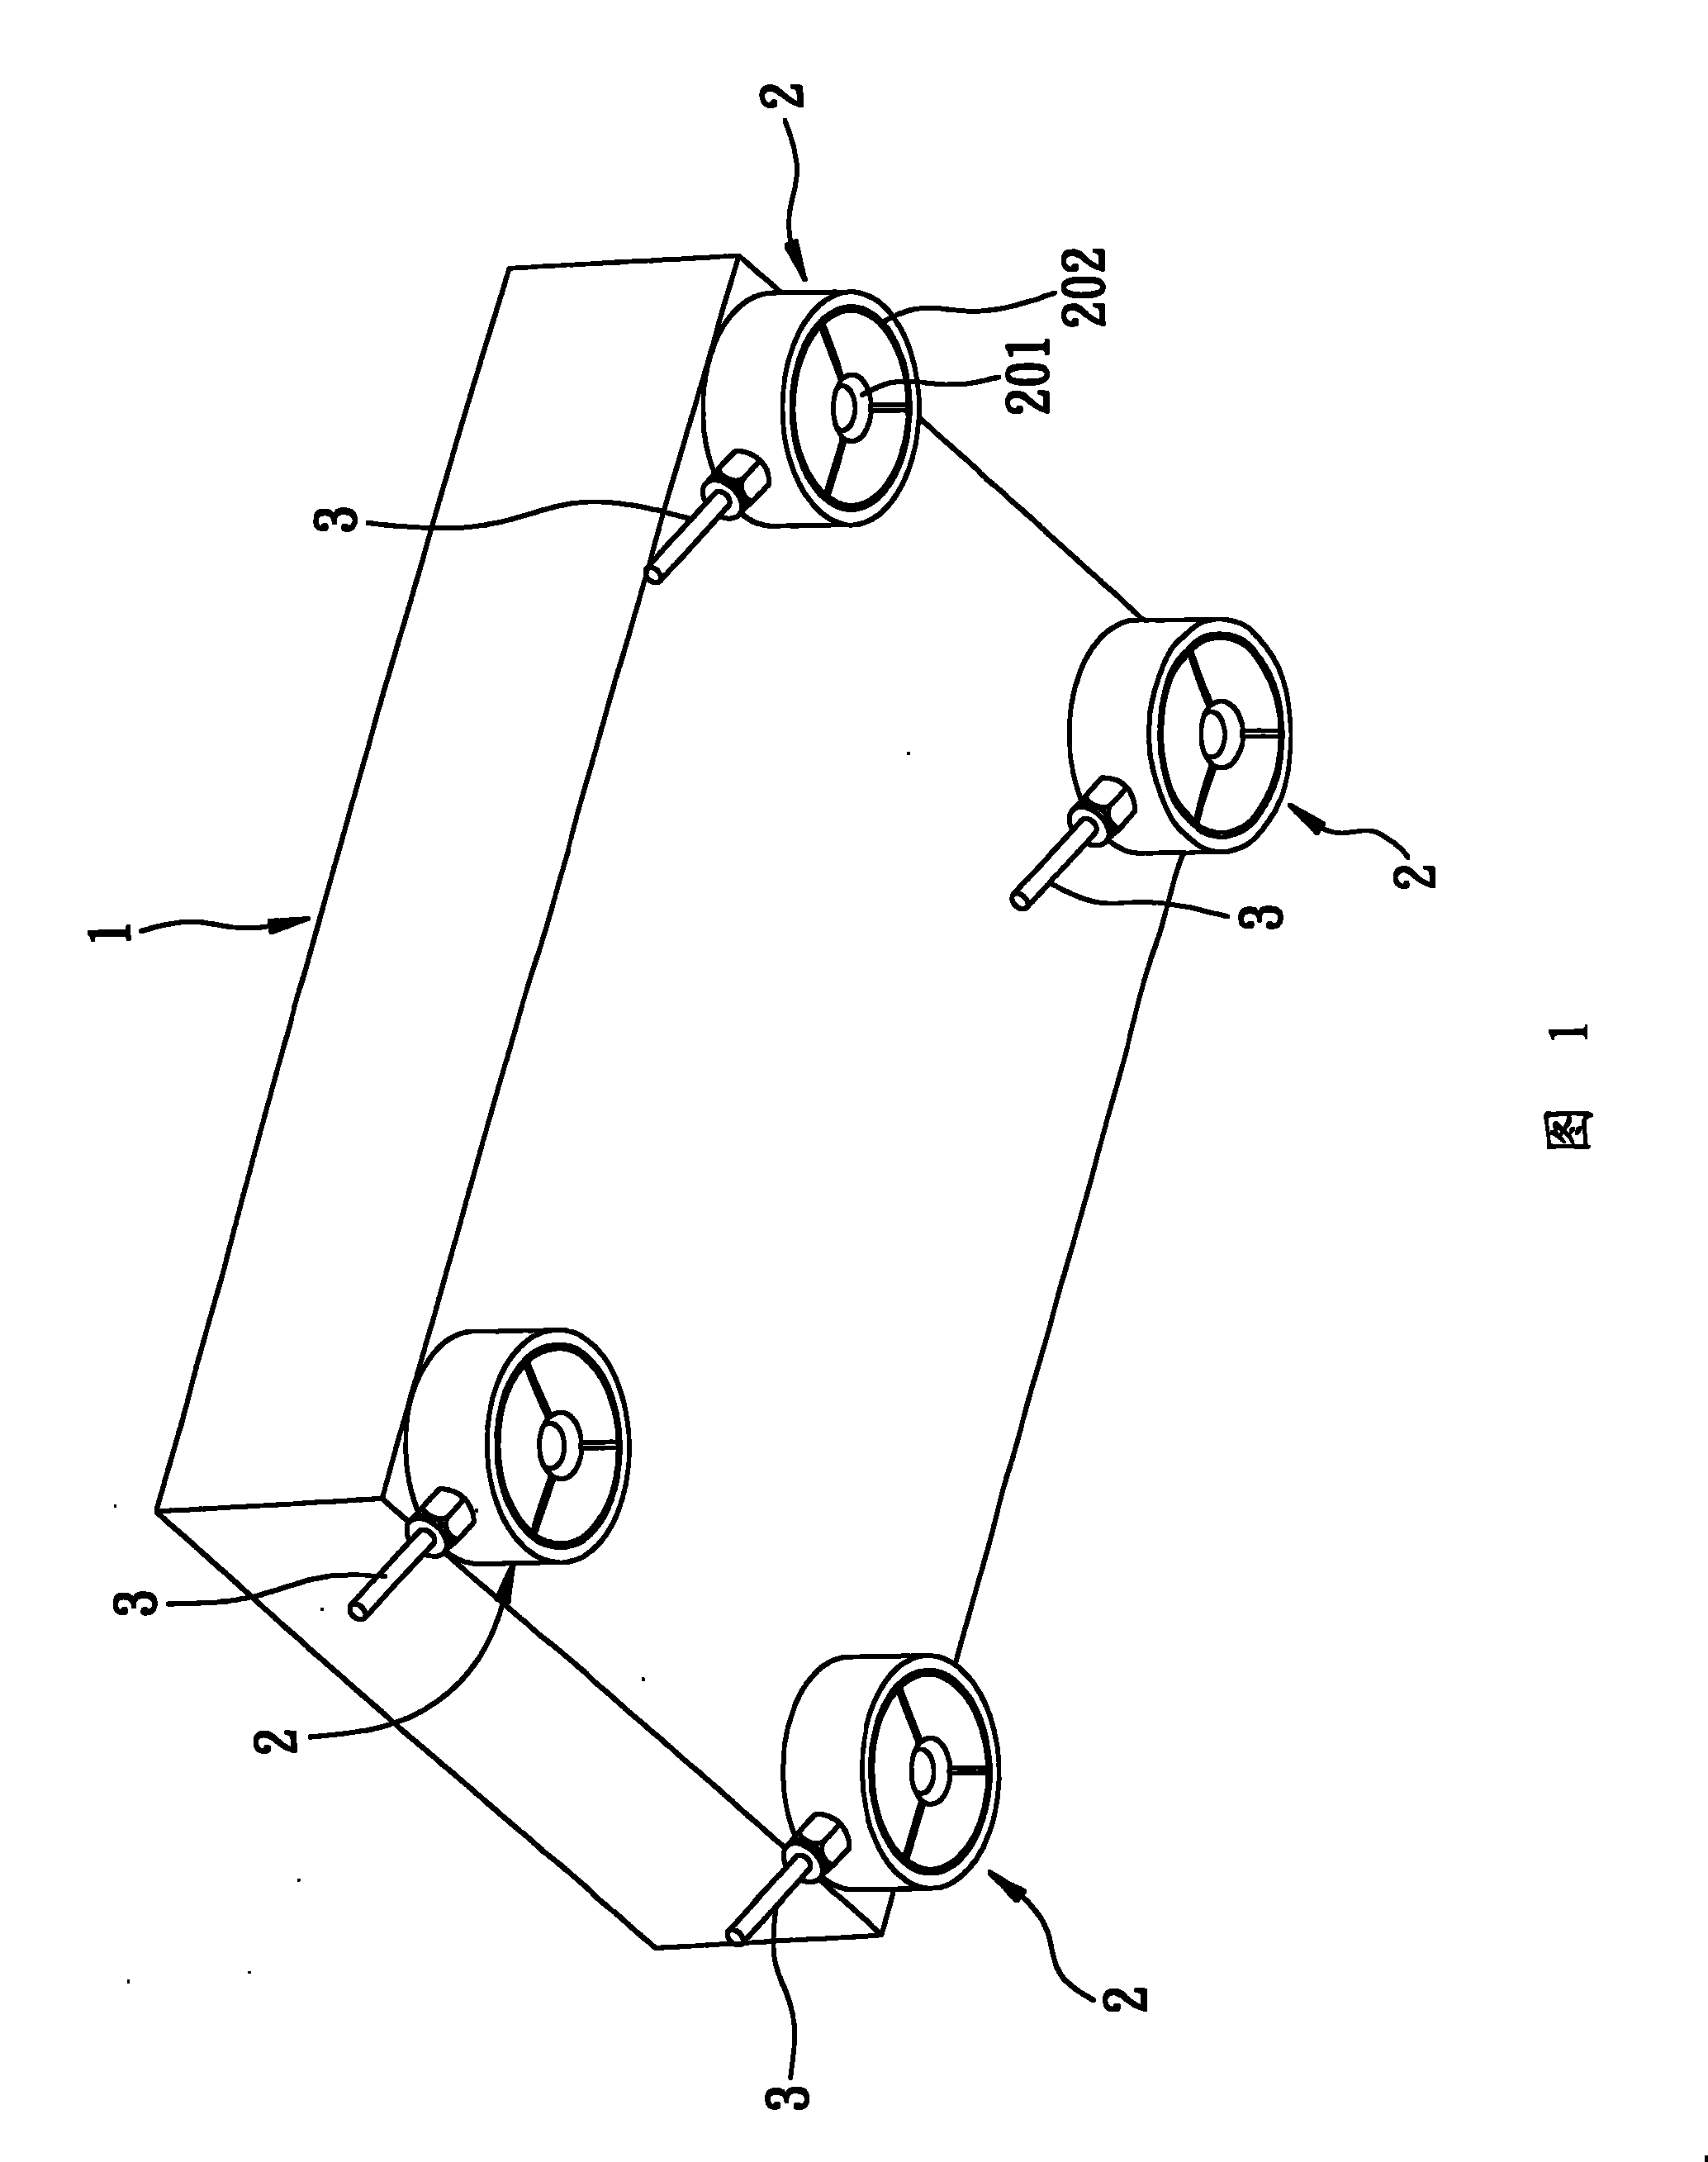 Combined type platform with air flotation and adsorption two-way function